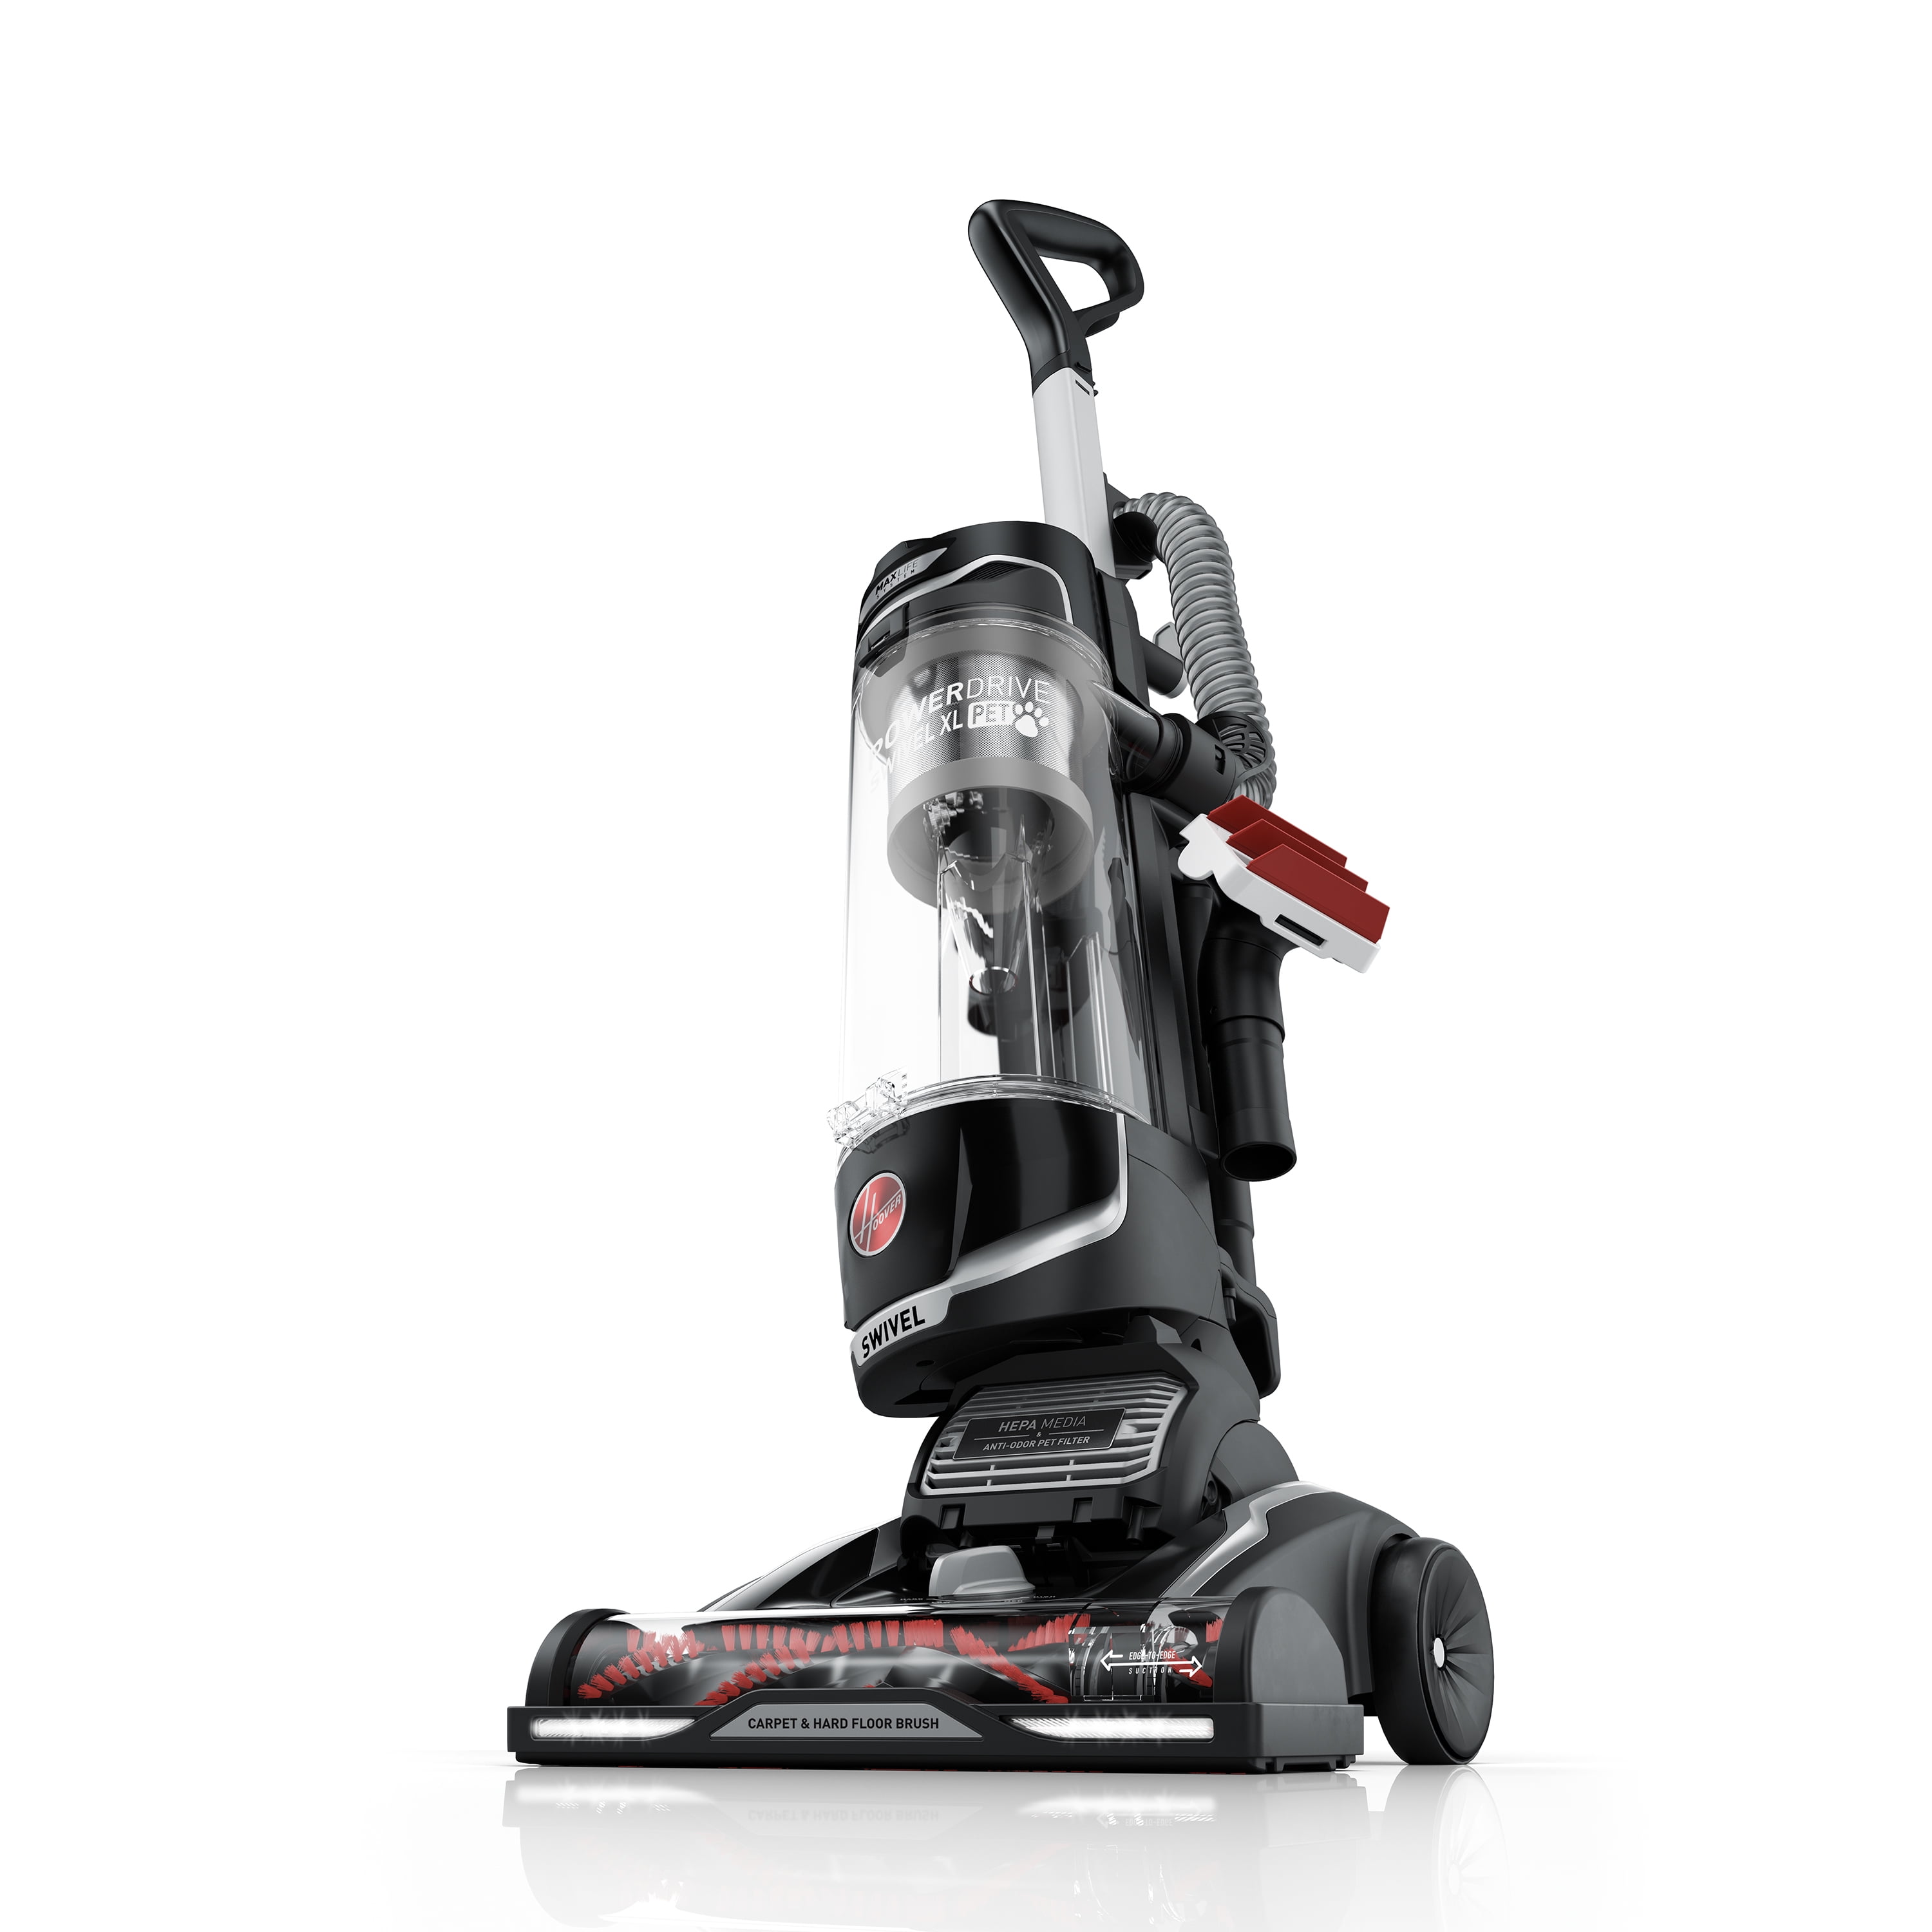 Hoover MAXLife Power Drive Swivel XL Pet Bagless Upright Vacuum Cleaner with HEPA Media Filtration, UH75210 - 1